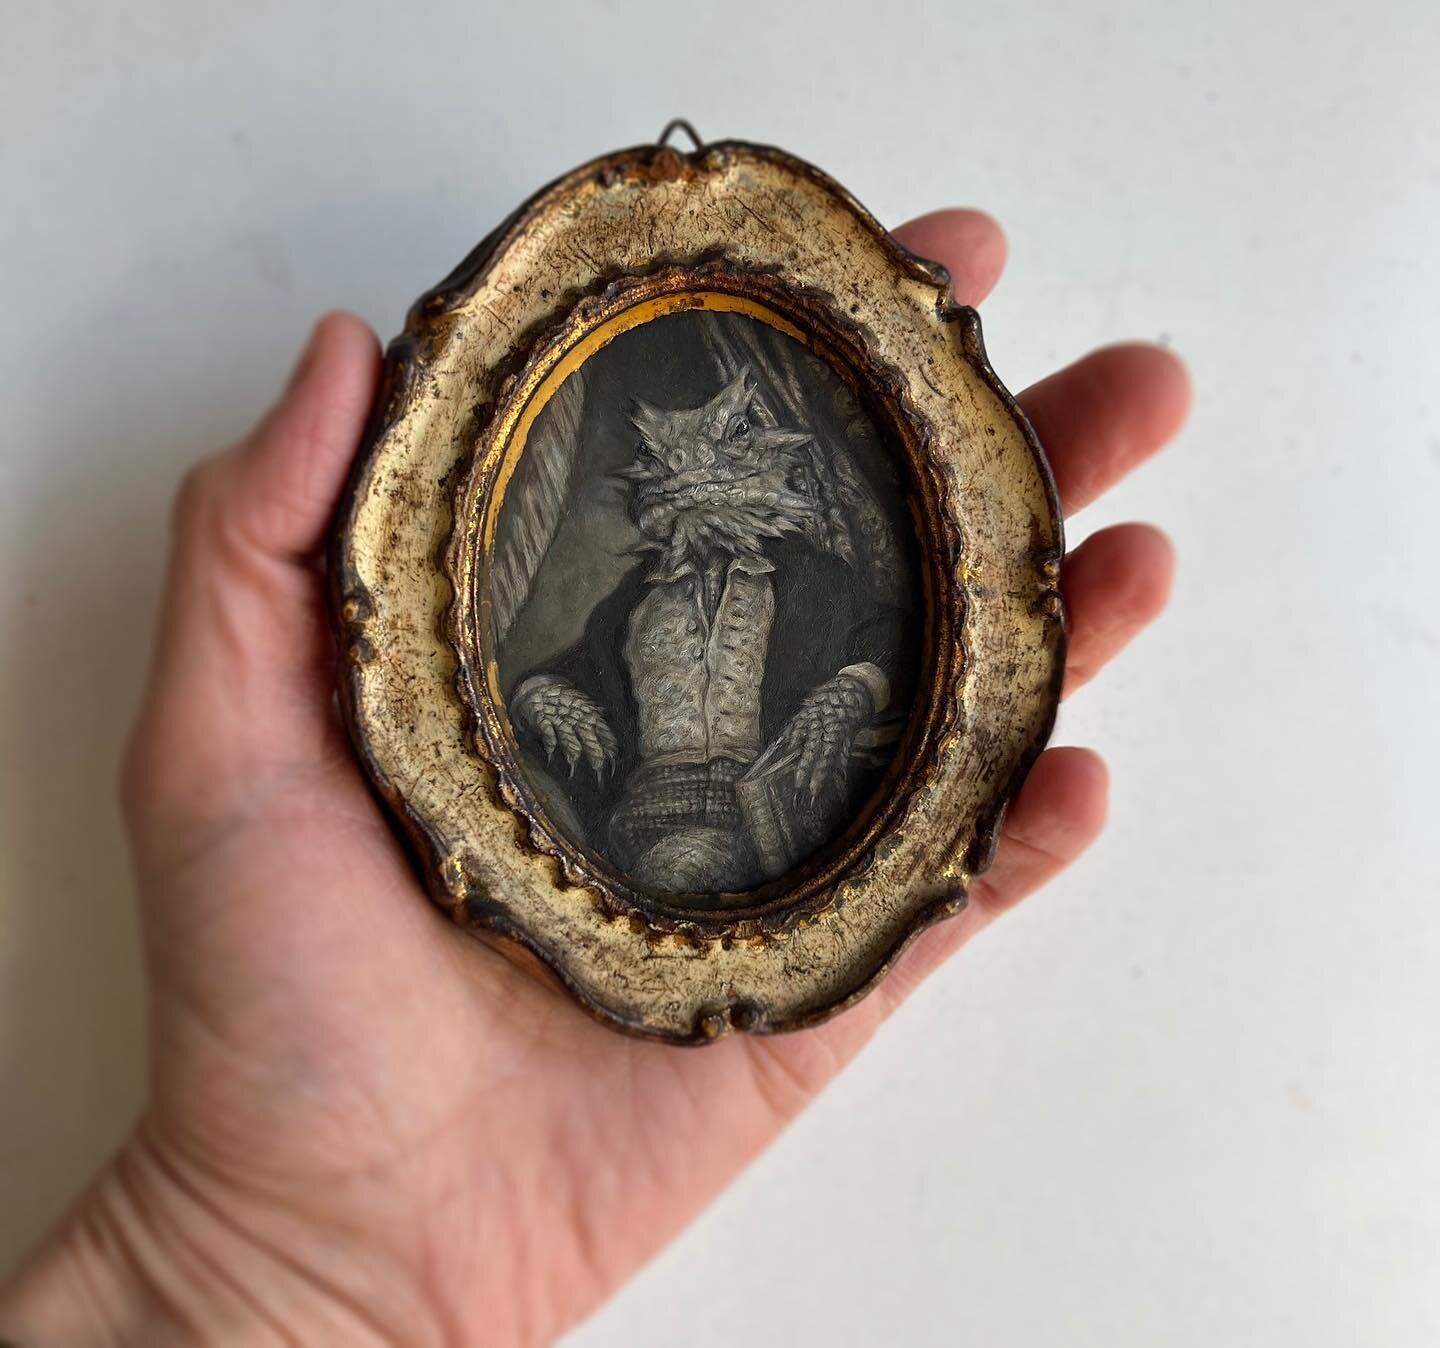 &ldquo;His petite, yet dignified portrait was a treasure&nbsp;acquired in the California desert by a chance encounter with a&nbsp;vagabond trader.&rdquo;

Introducing my latest miniature portrait: &lsquo;The Learned Lizard&rsquo; a 2.75&rdquo;x 3.5&r